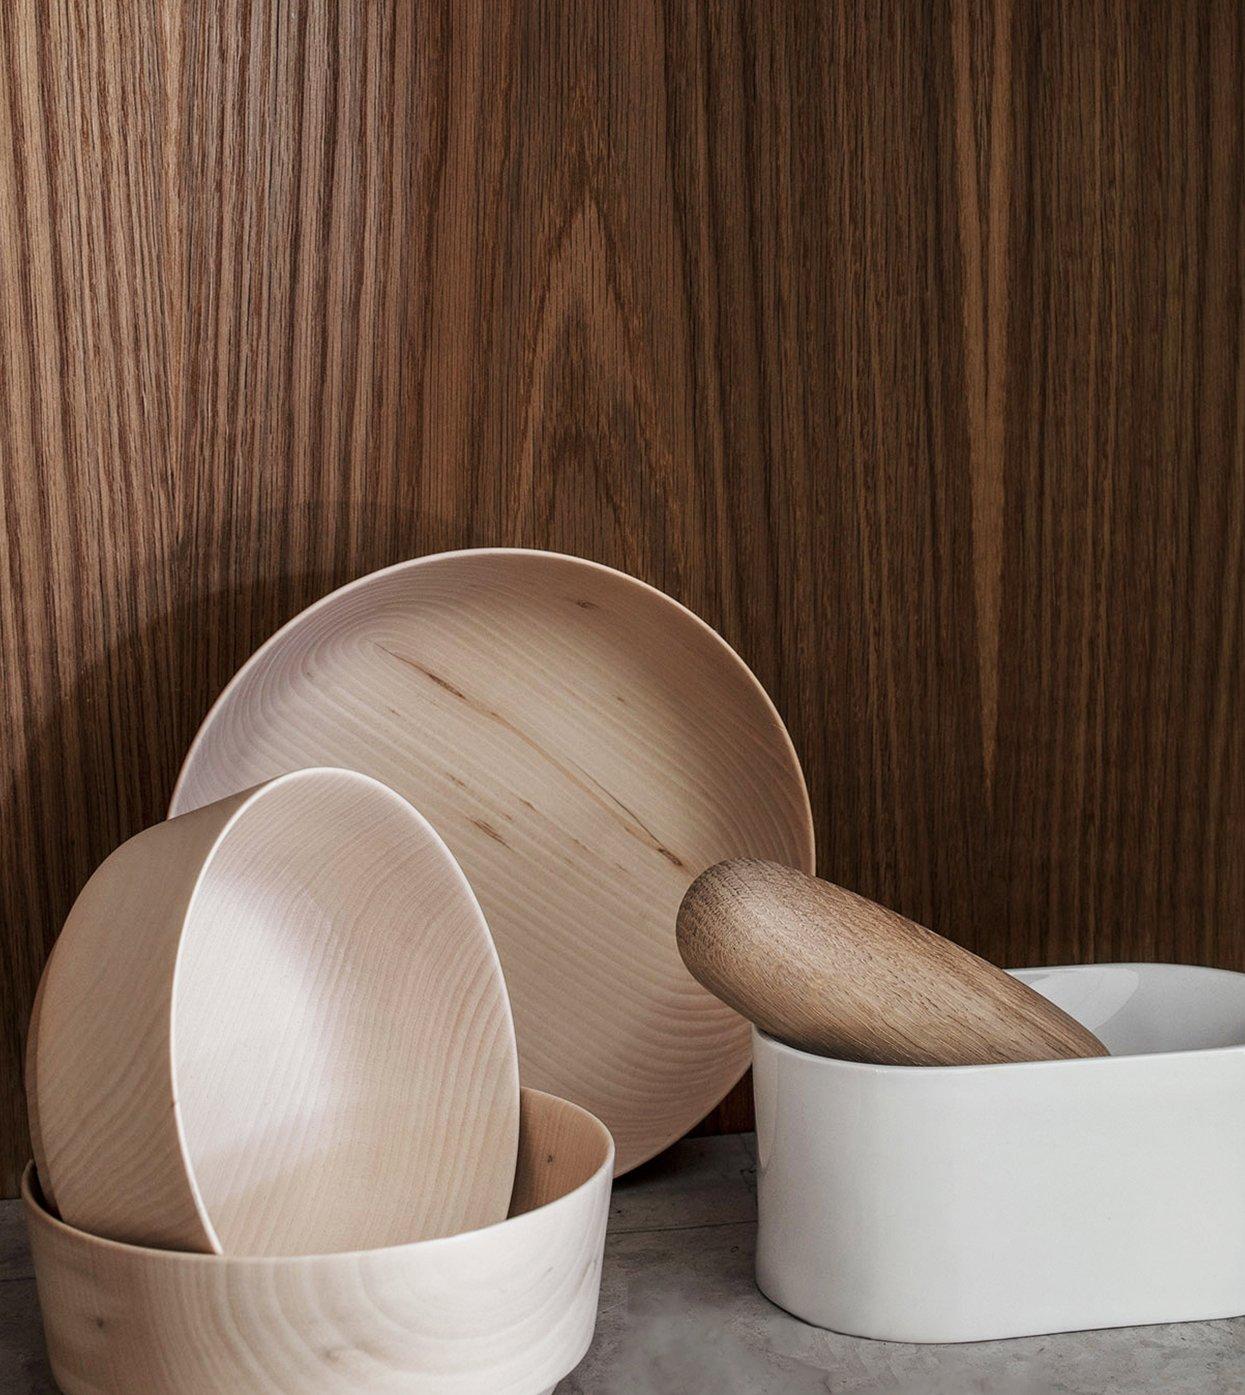 The Moer Mortar and Pestle set, made from porcelain and chestnut wood, has a minimal yet sculptural expression. When in use, the heavy and elongated shape of the mortar ensures a sturdy work base. When not in use, the pestle rests naturally,